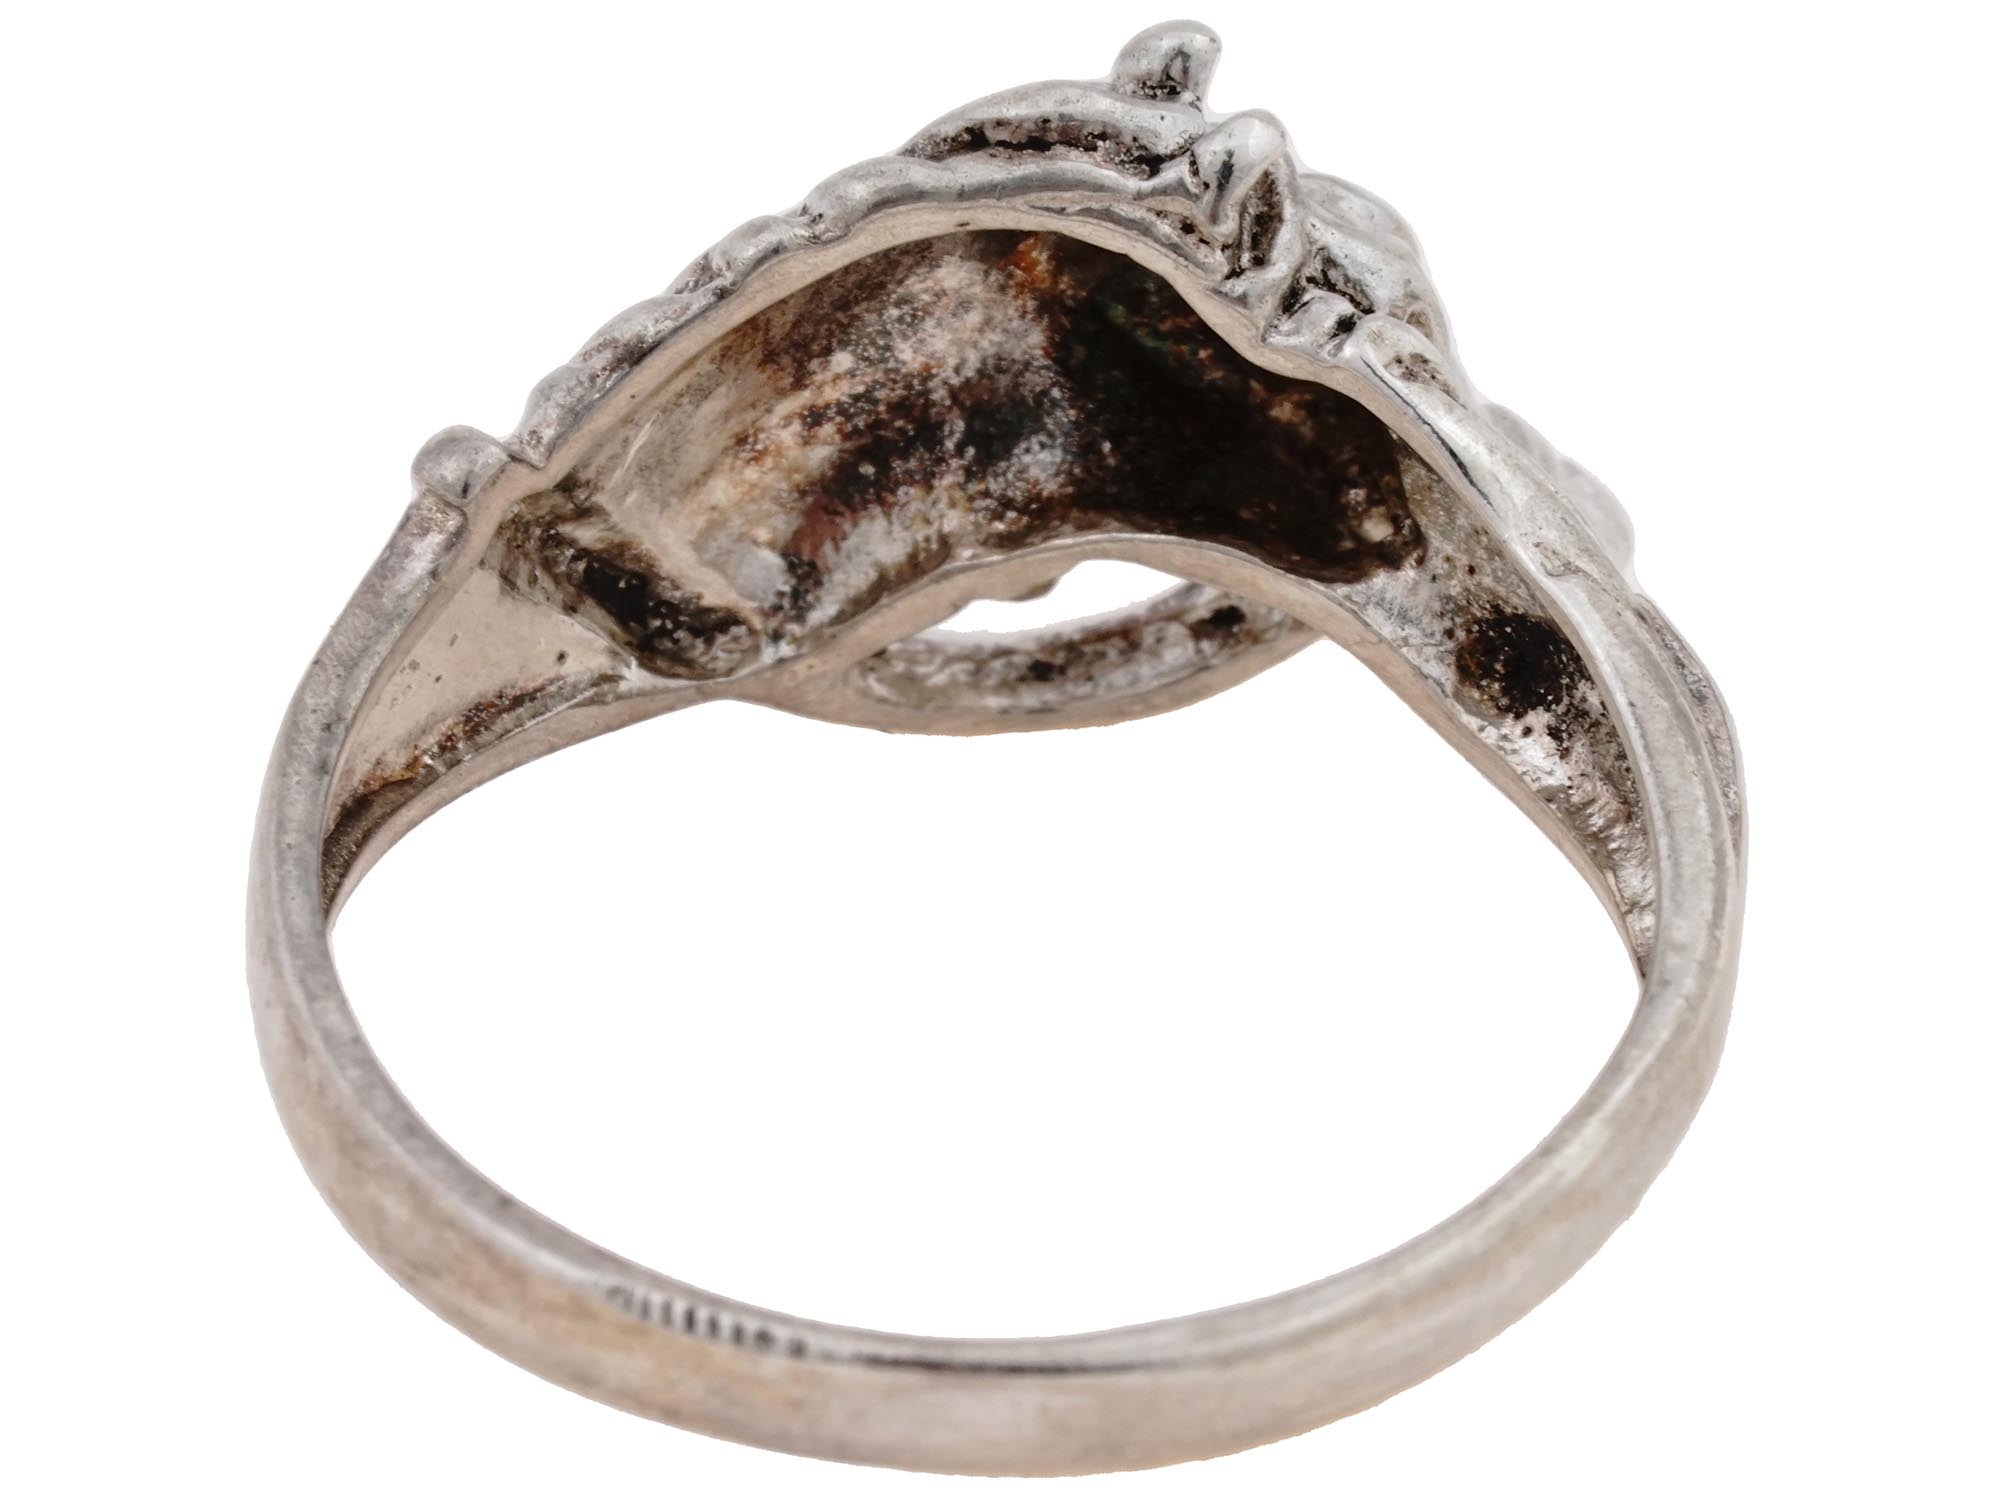 FIGURAL HORSE HEAD DESIGN STERLING SILVER RING PIC-5